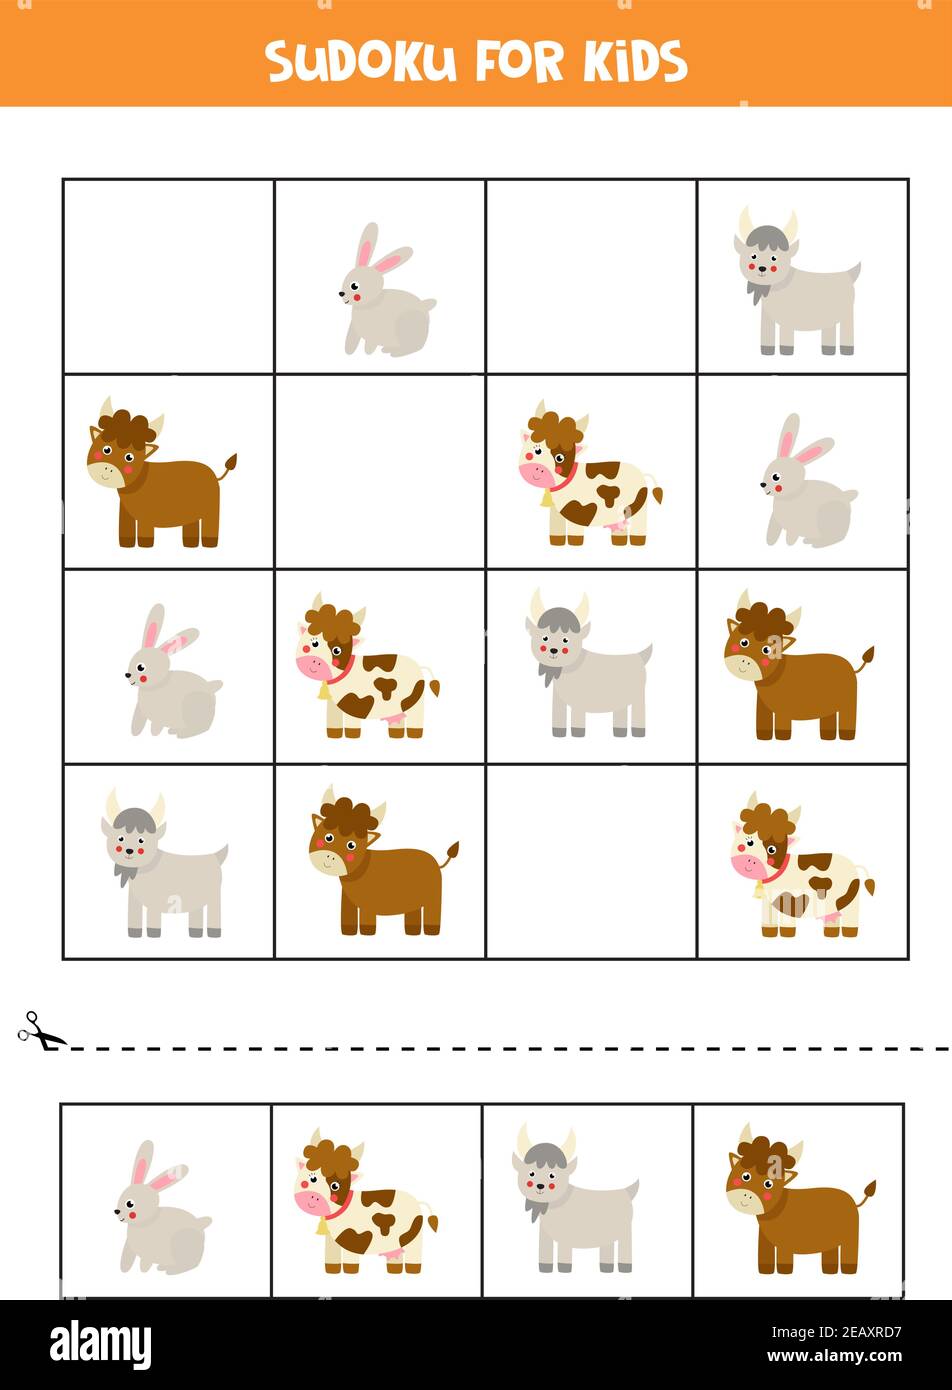 Sudoku for preschool kids. Logical game with farm animals. Stock Vector